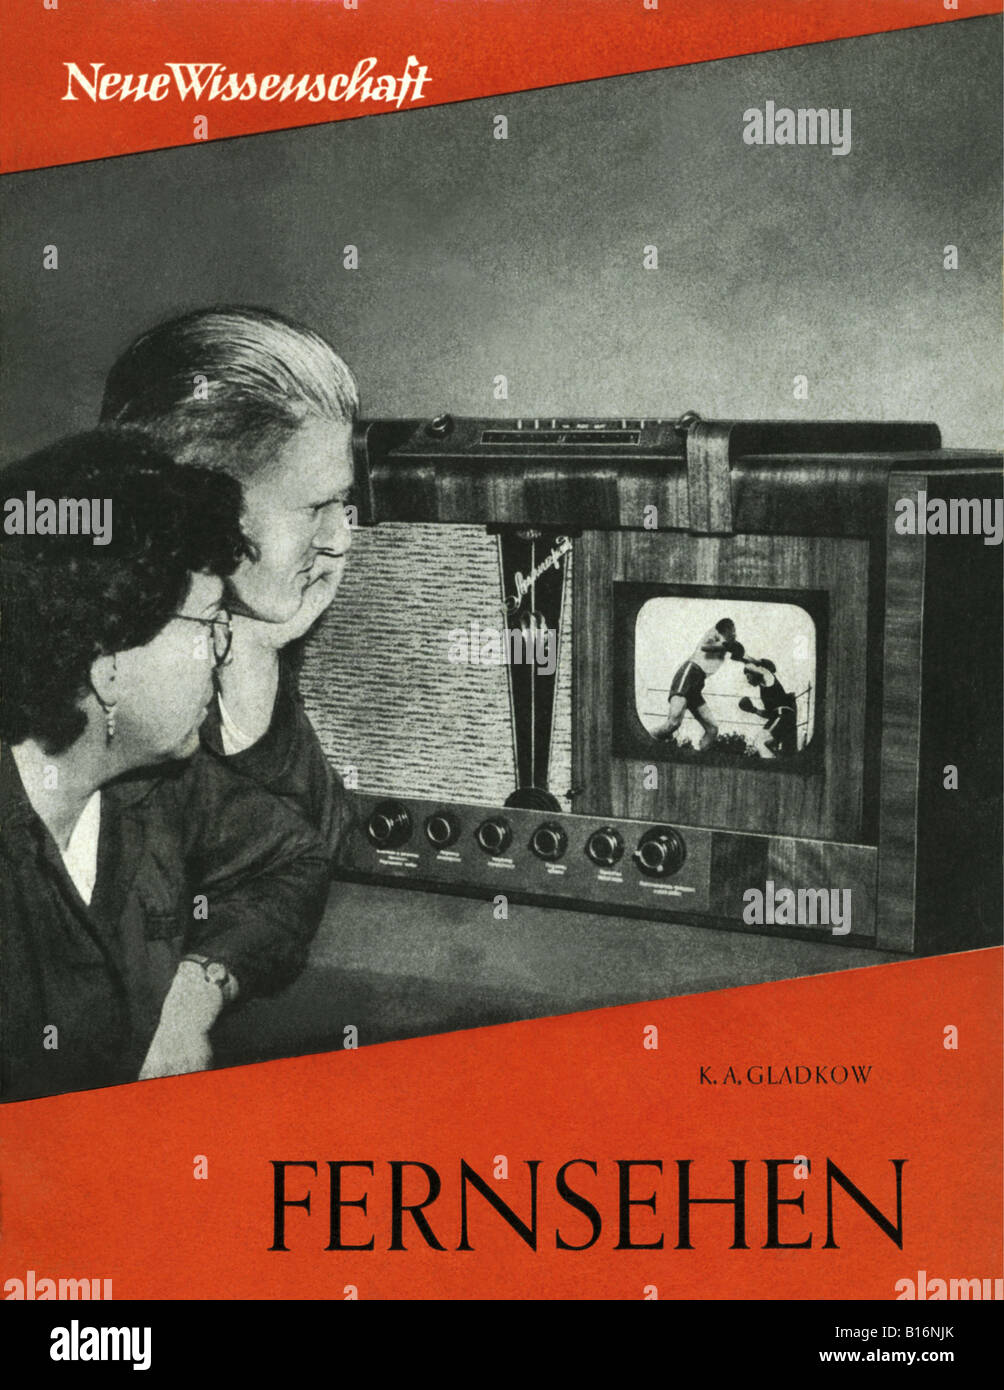 broadcast, television, publications, book cover: 'Fernsehen', Neue Wissenschaft by K. A. Gladkow, GDR, 1954, Stock Photo